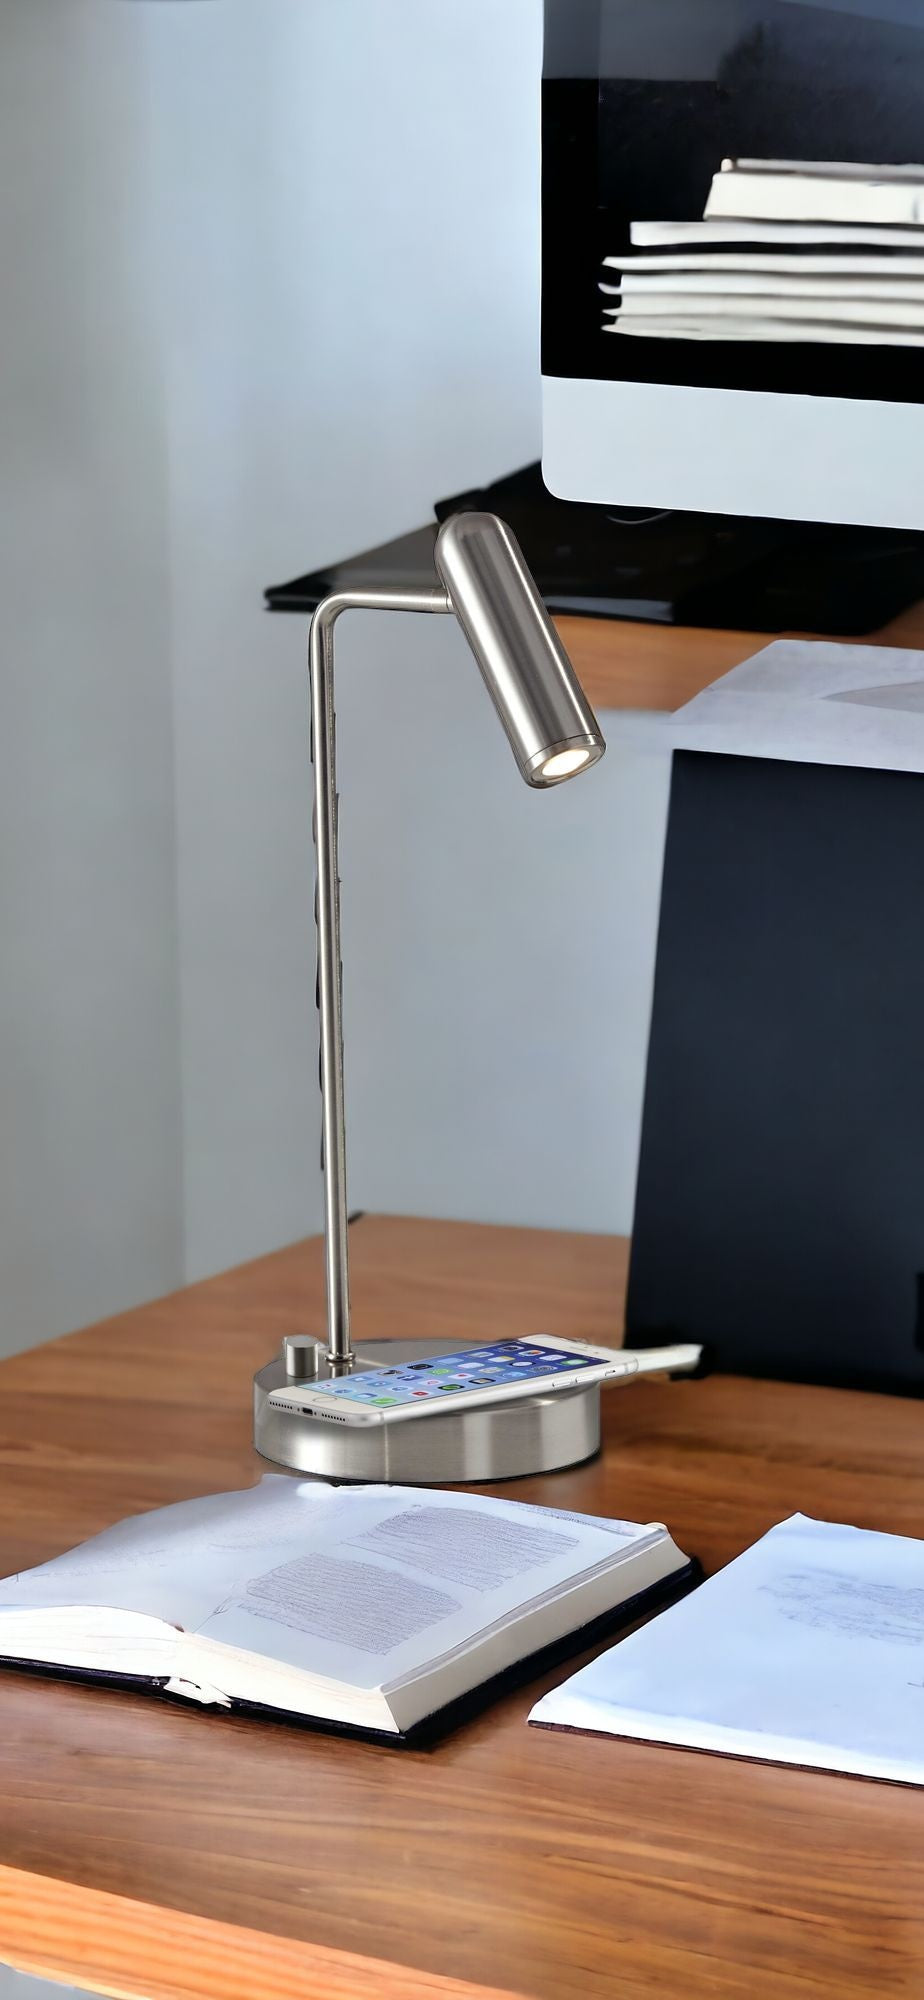 17" Silver Desk Lamp with USB and Wireless Charging